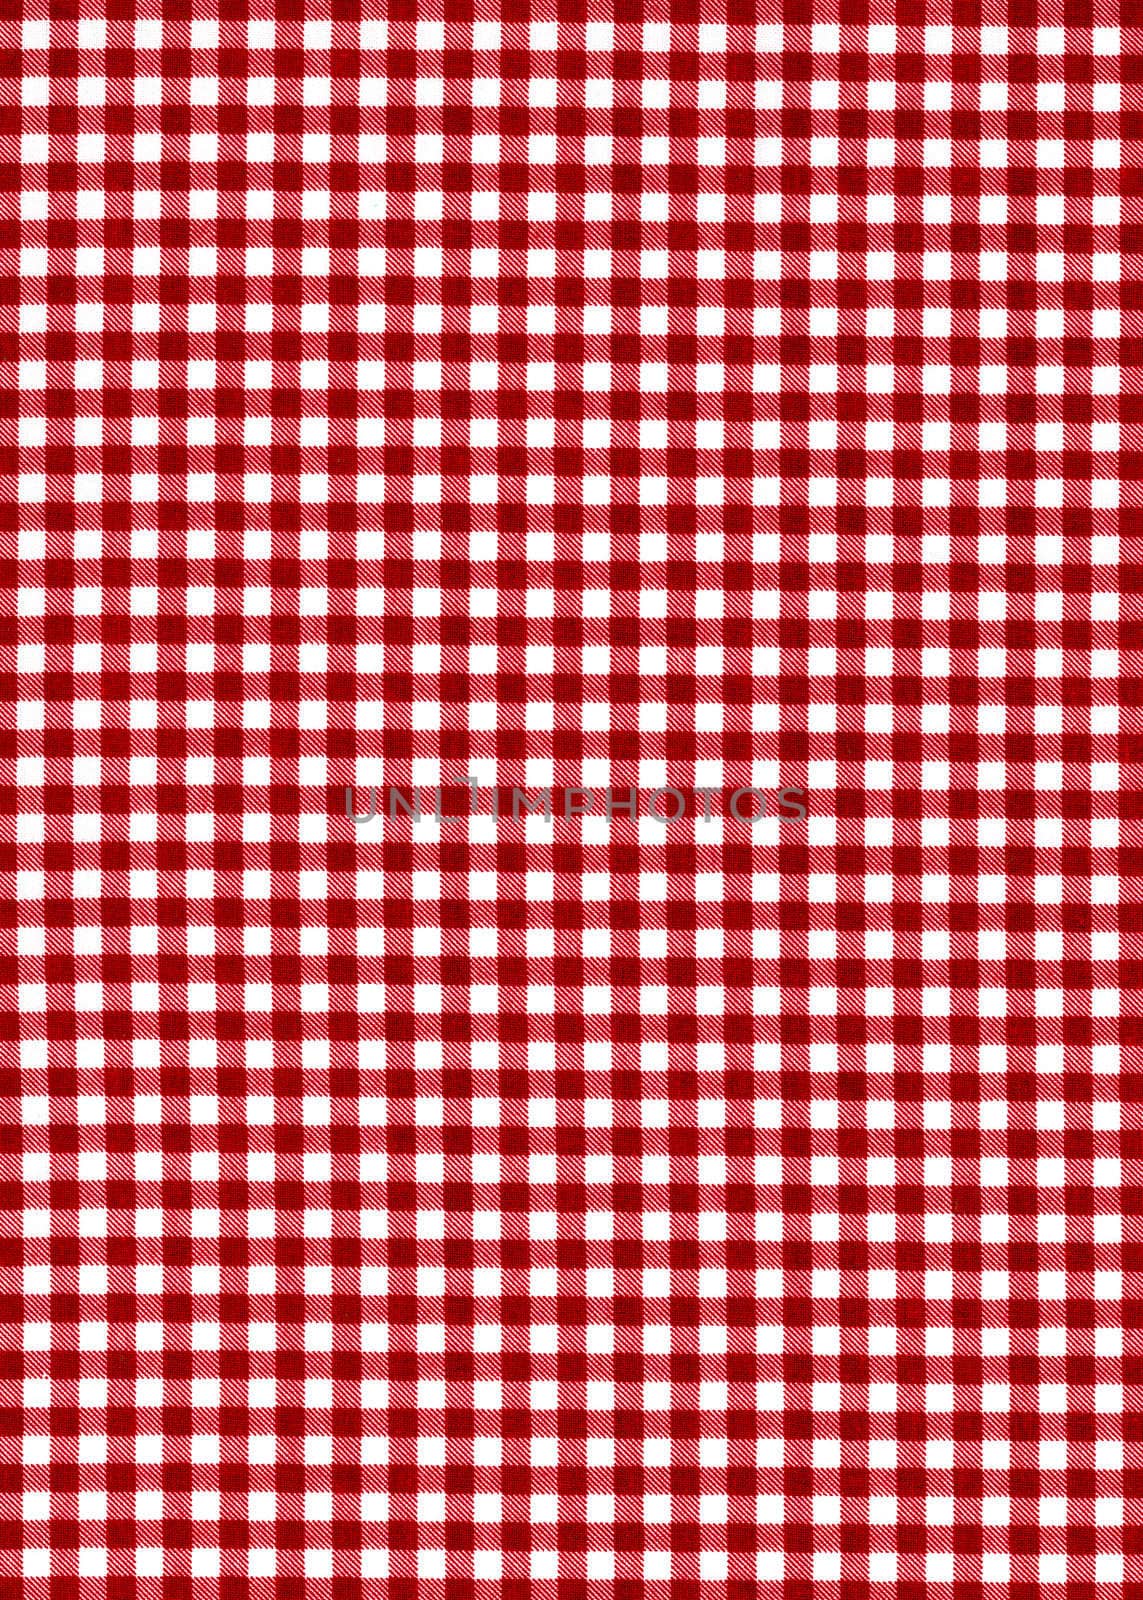 Tablecloth, can be used for background  by motorolka